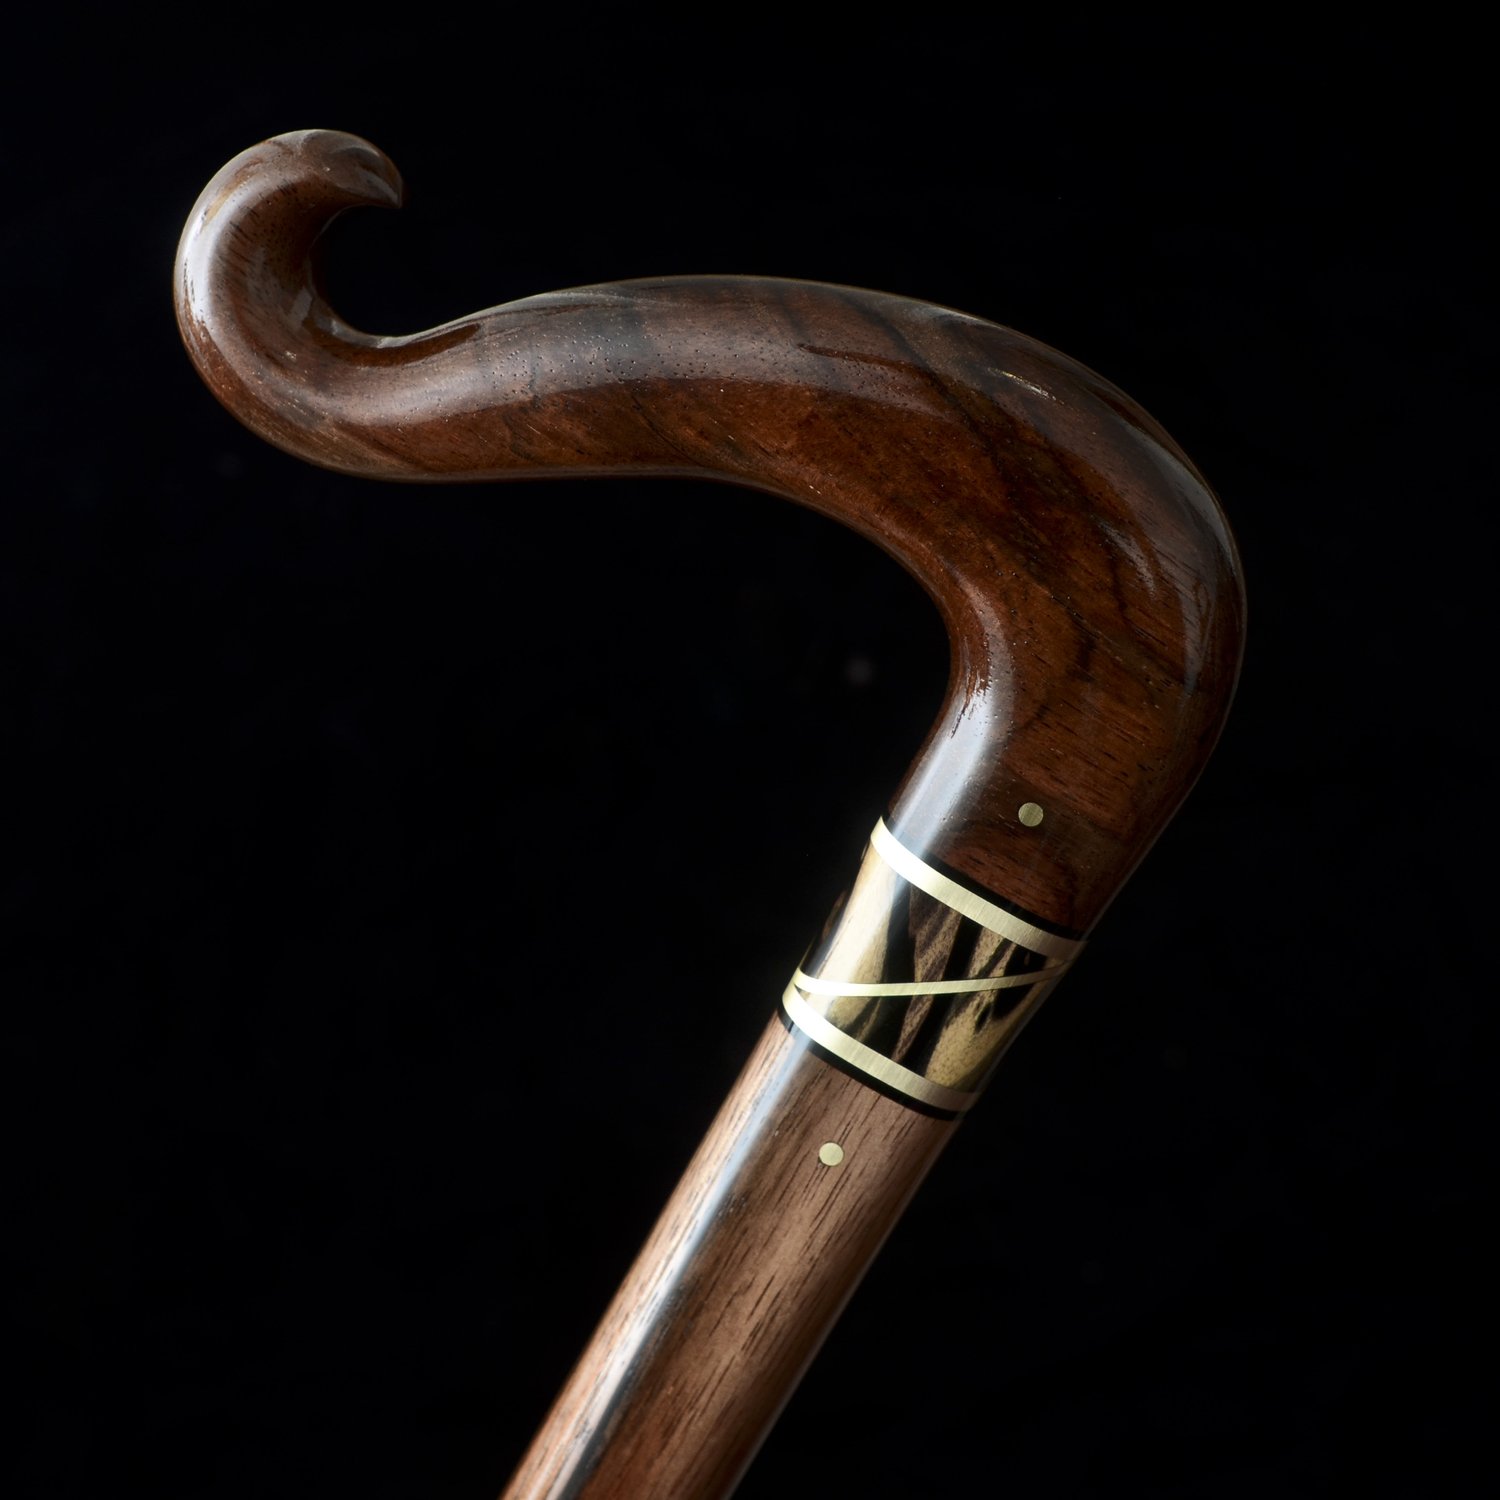 Walking Stick – The Lawrence Hall of Science